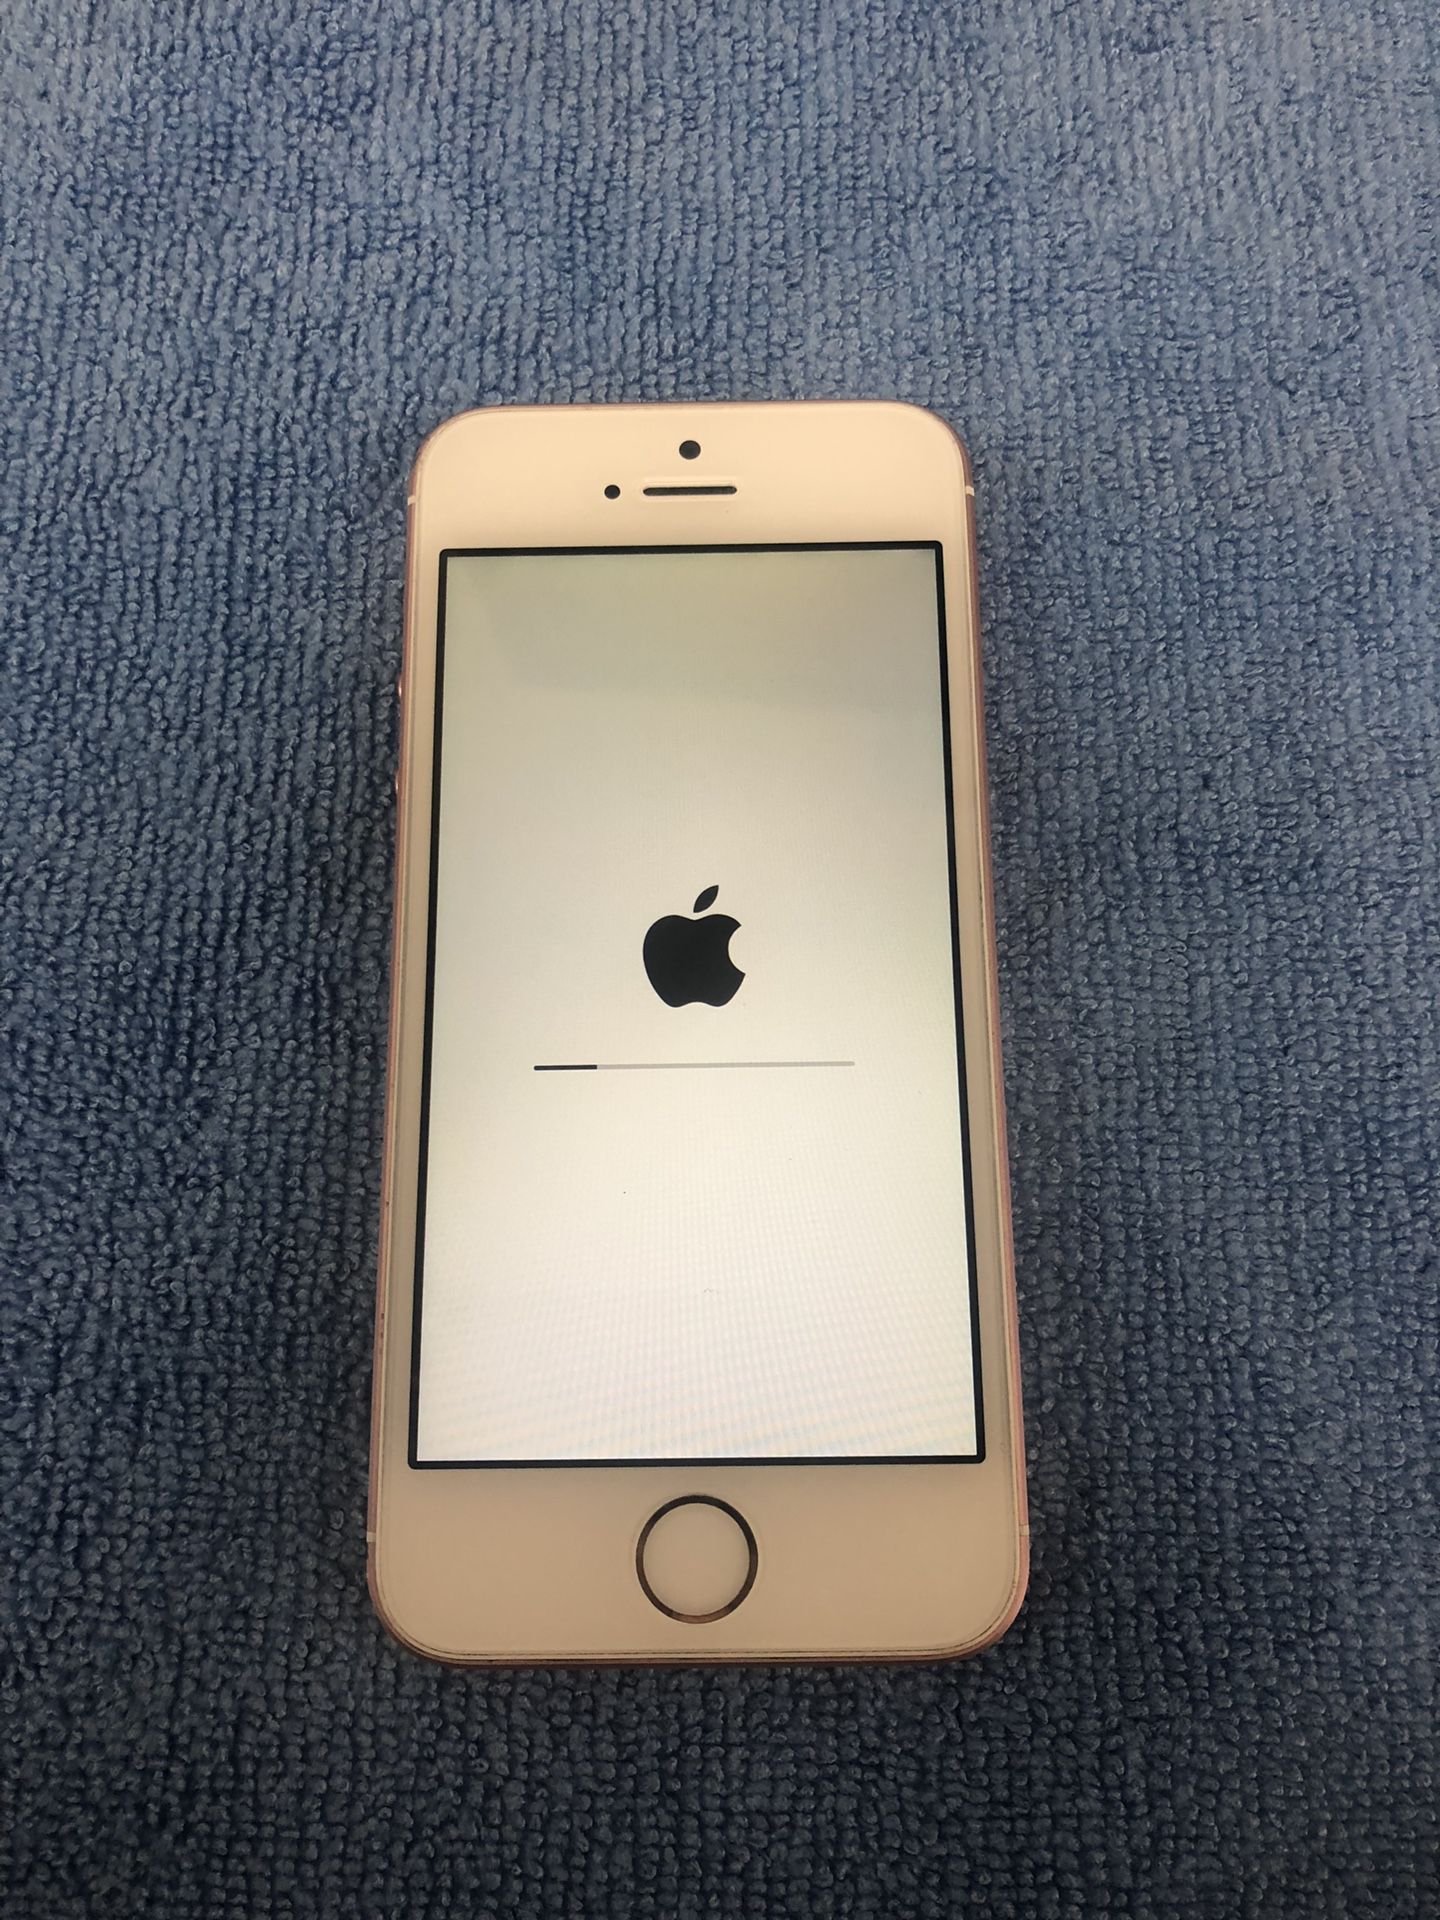 iPhone 5SE 16GB Tmobile only